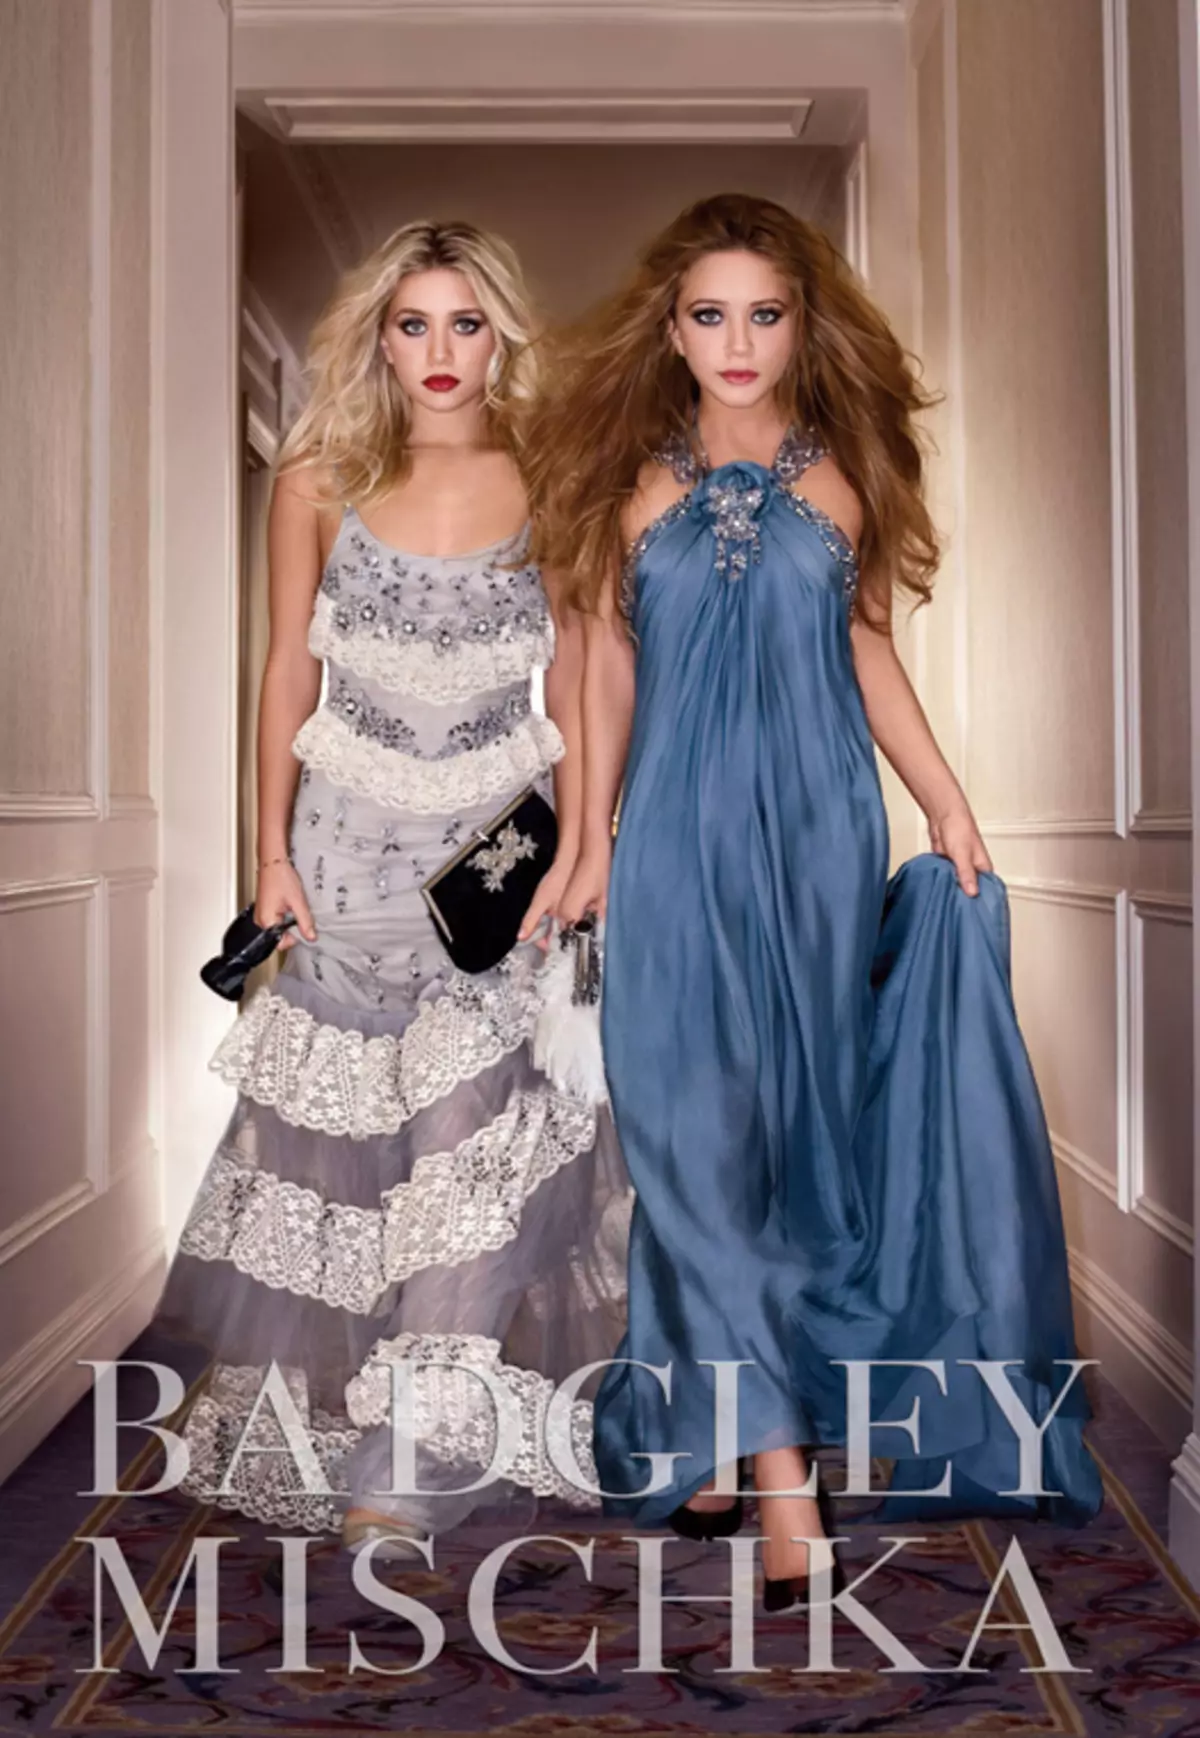 Badgley Mischka (96 photos): wedding shoes and their price, perfume, dresses, shoes and bags, brand history and reviews 3804_20